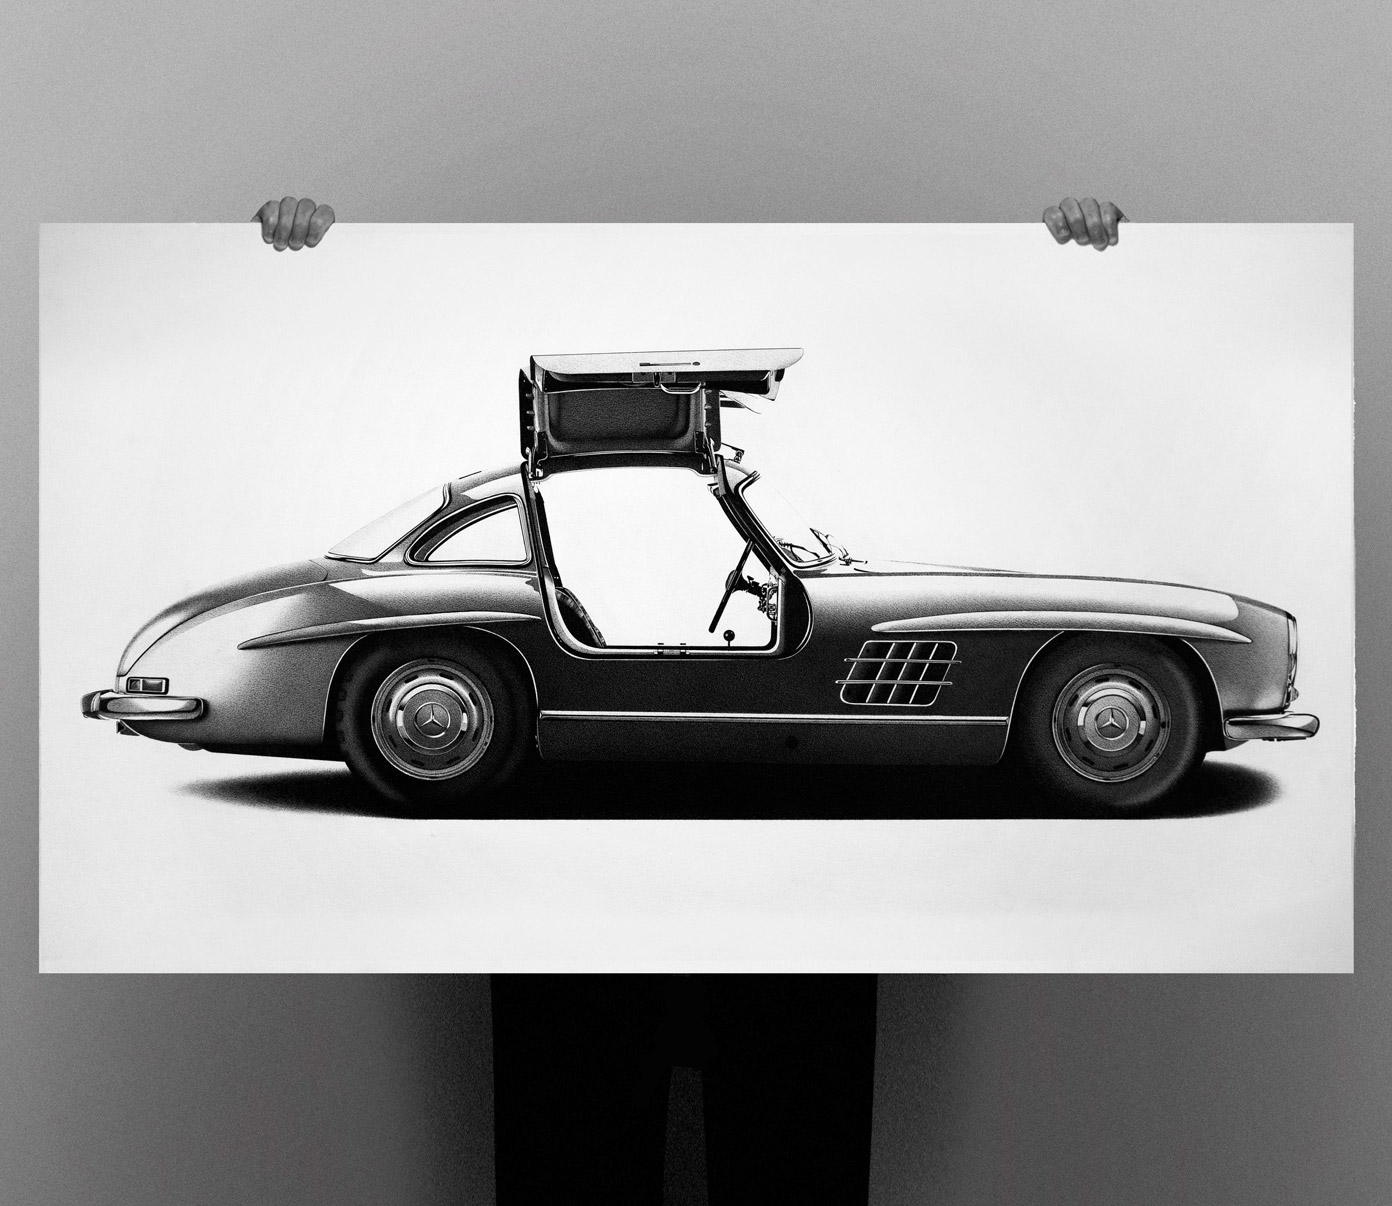 Classic car drawings by Alessandro Paglia.